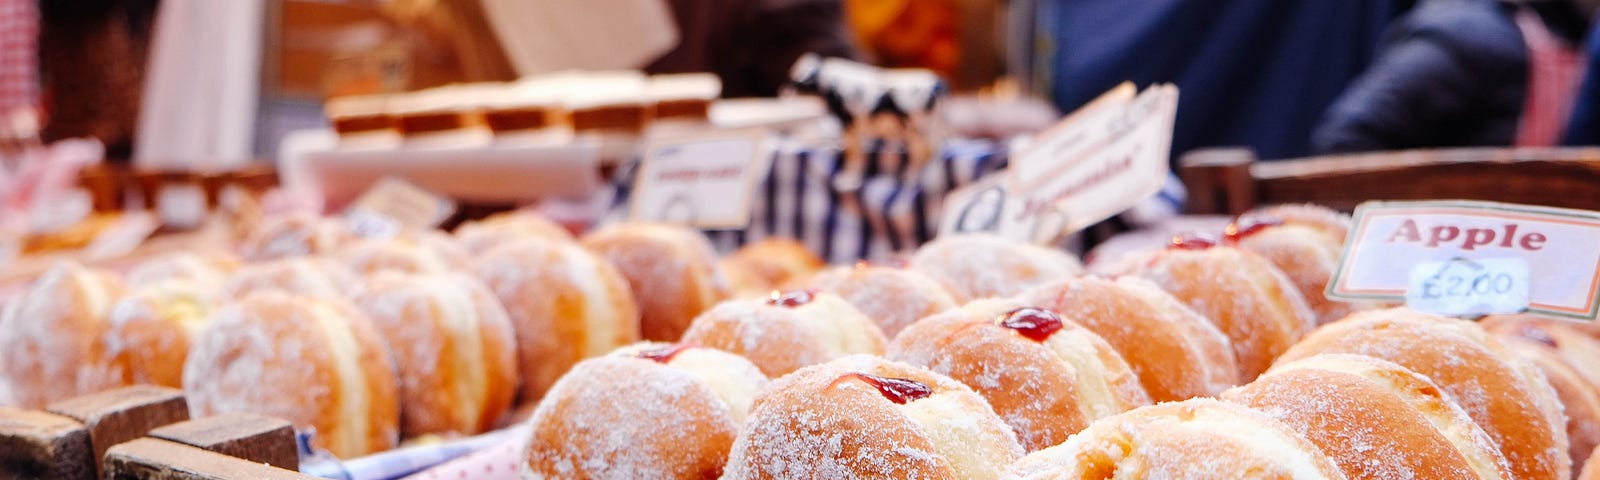 A display of fresh powdered jelly doughnuts sits in a bakery.